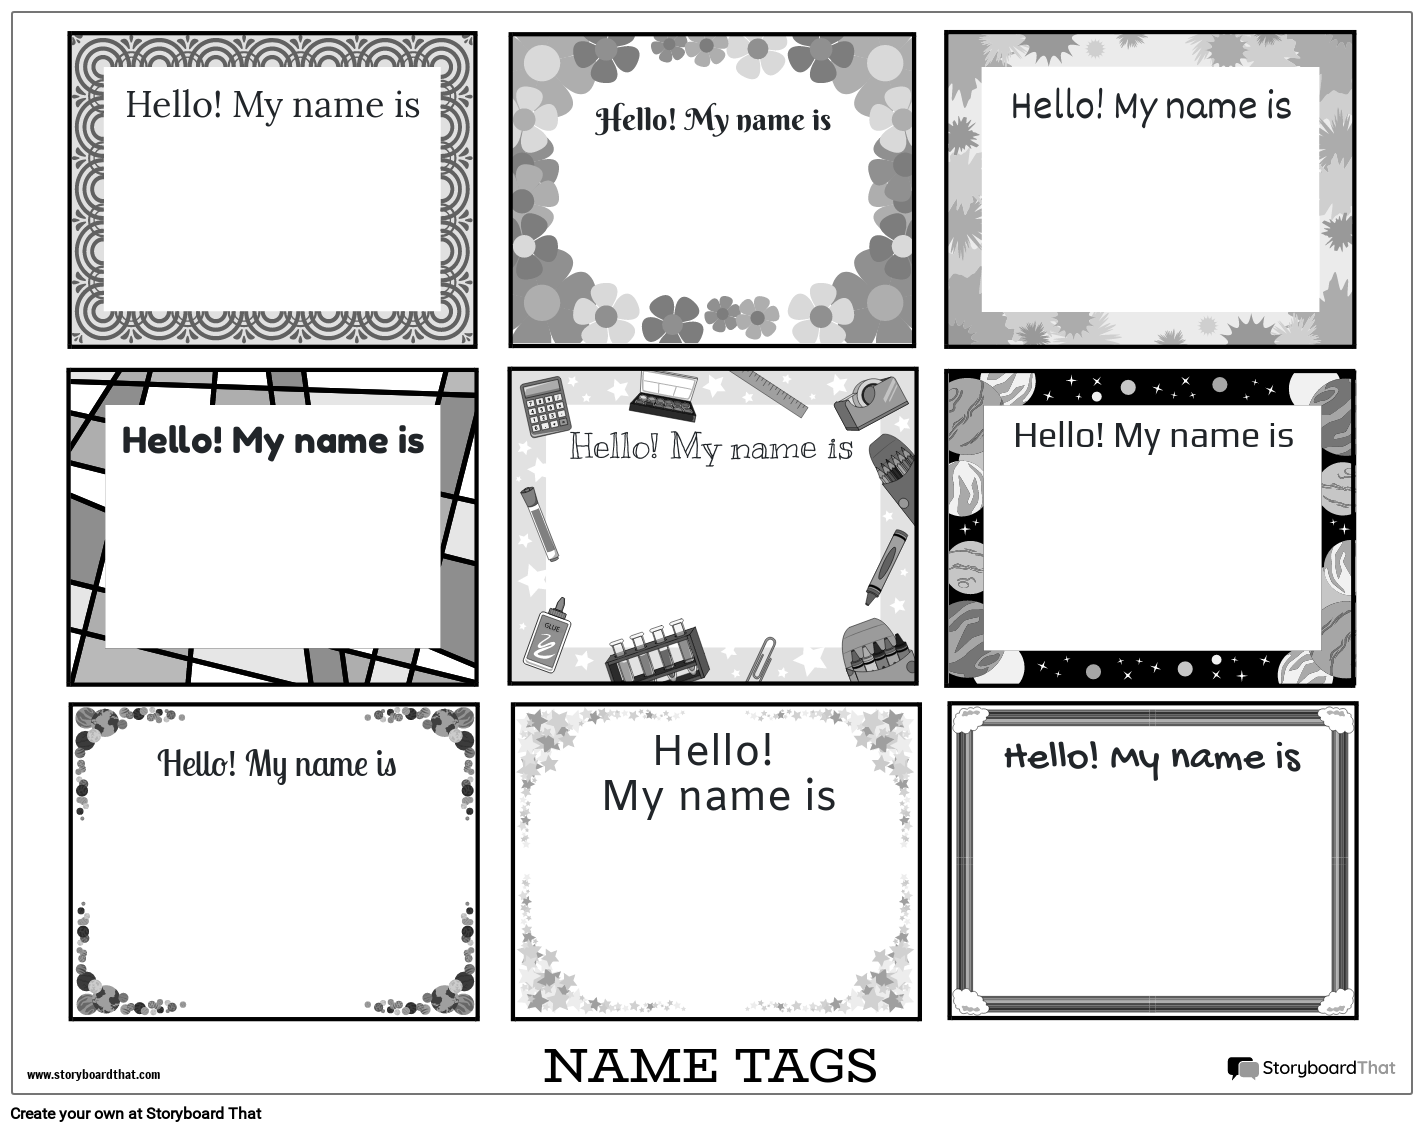 Name Tag Worksheet with Various Background Patterns